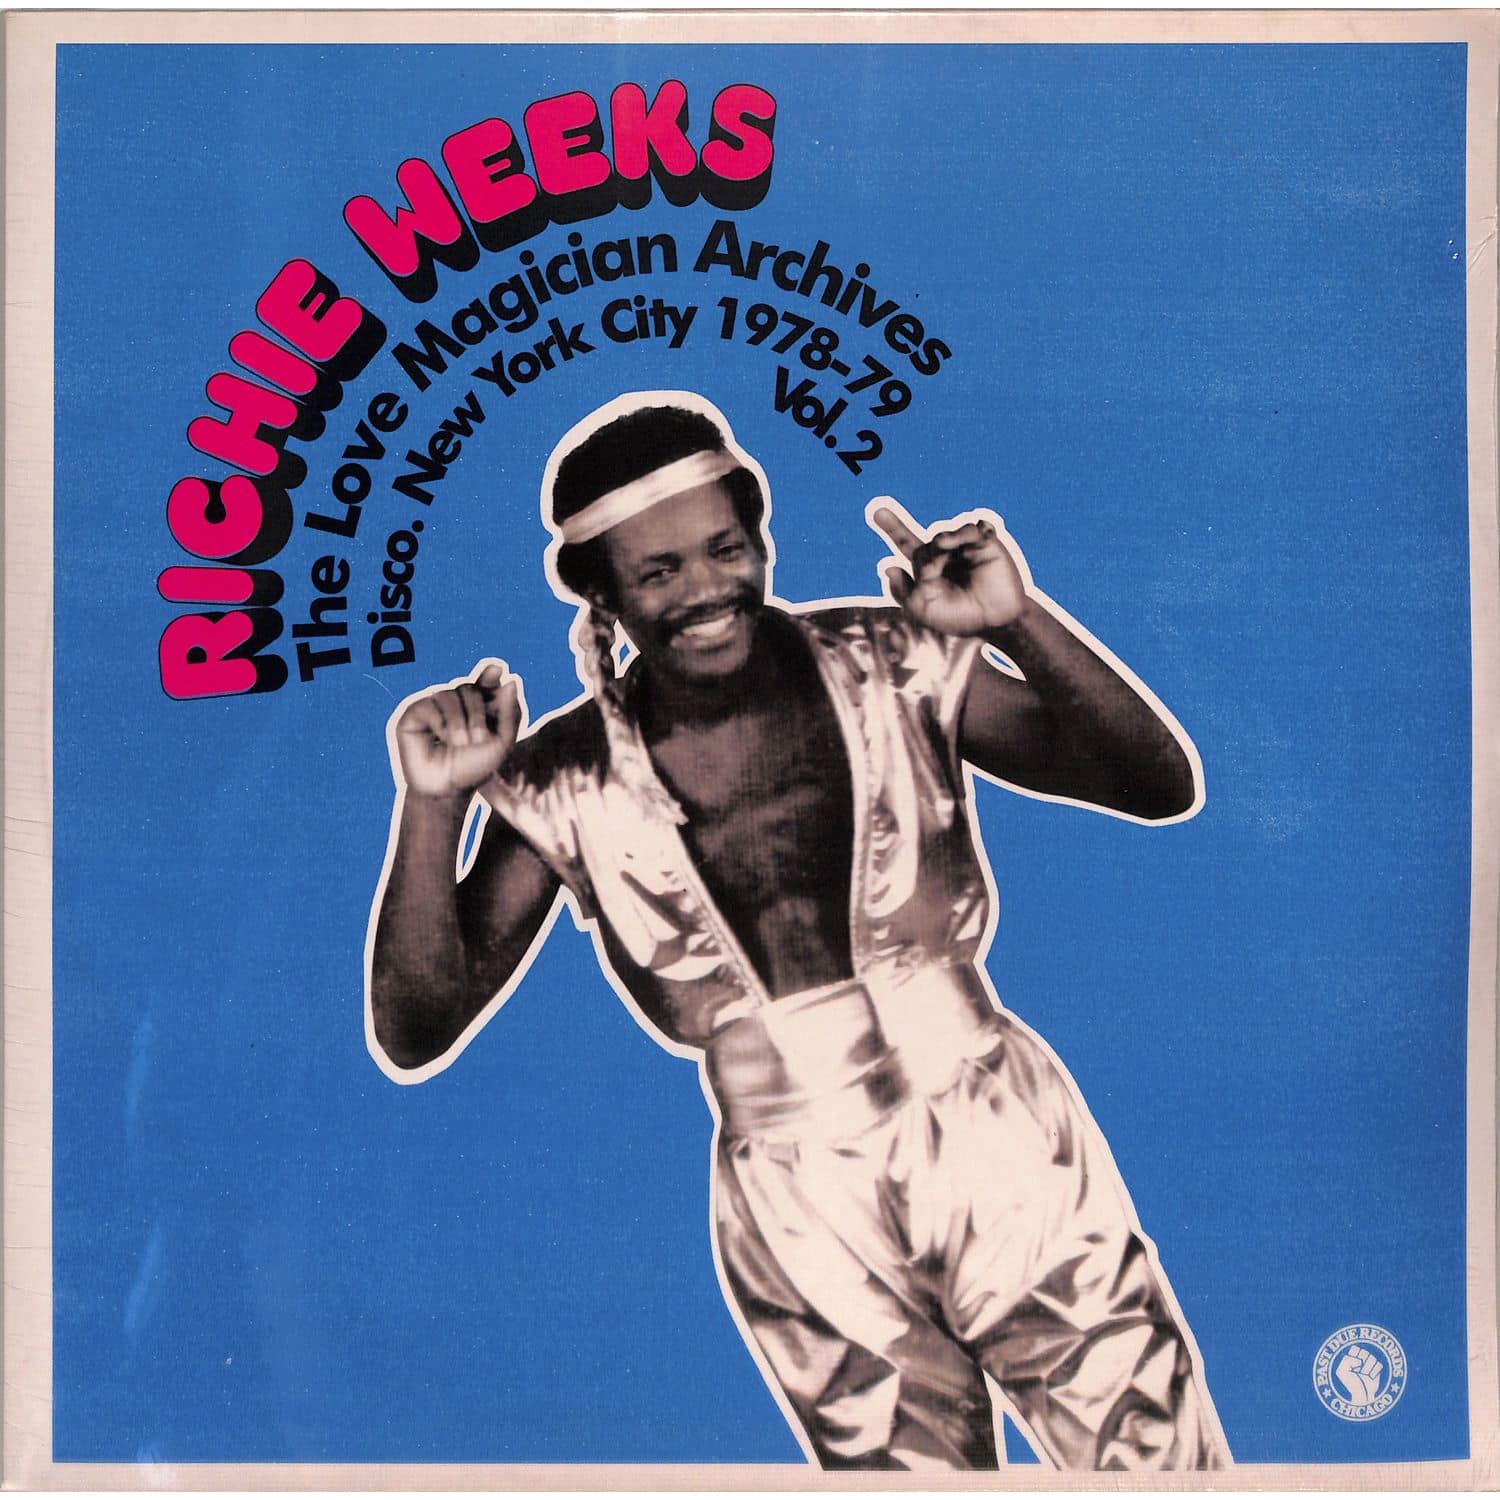 Richie Weeks - THE LOVE MAGICIAN ARCHIVES - DISCO - NEW YORK CITY 1978-79 VOL.2)